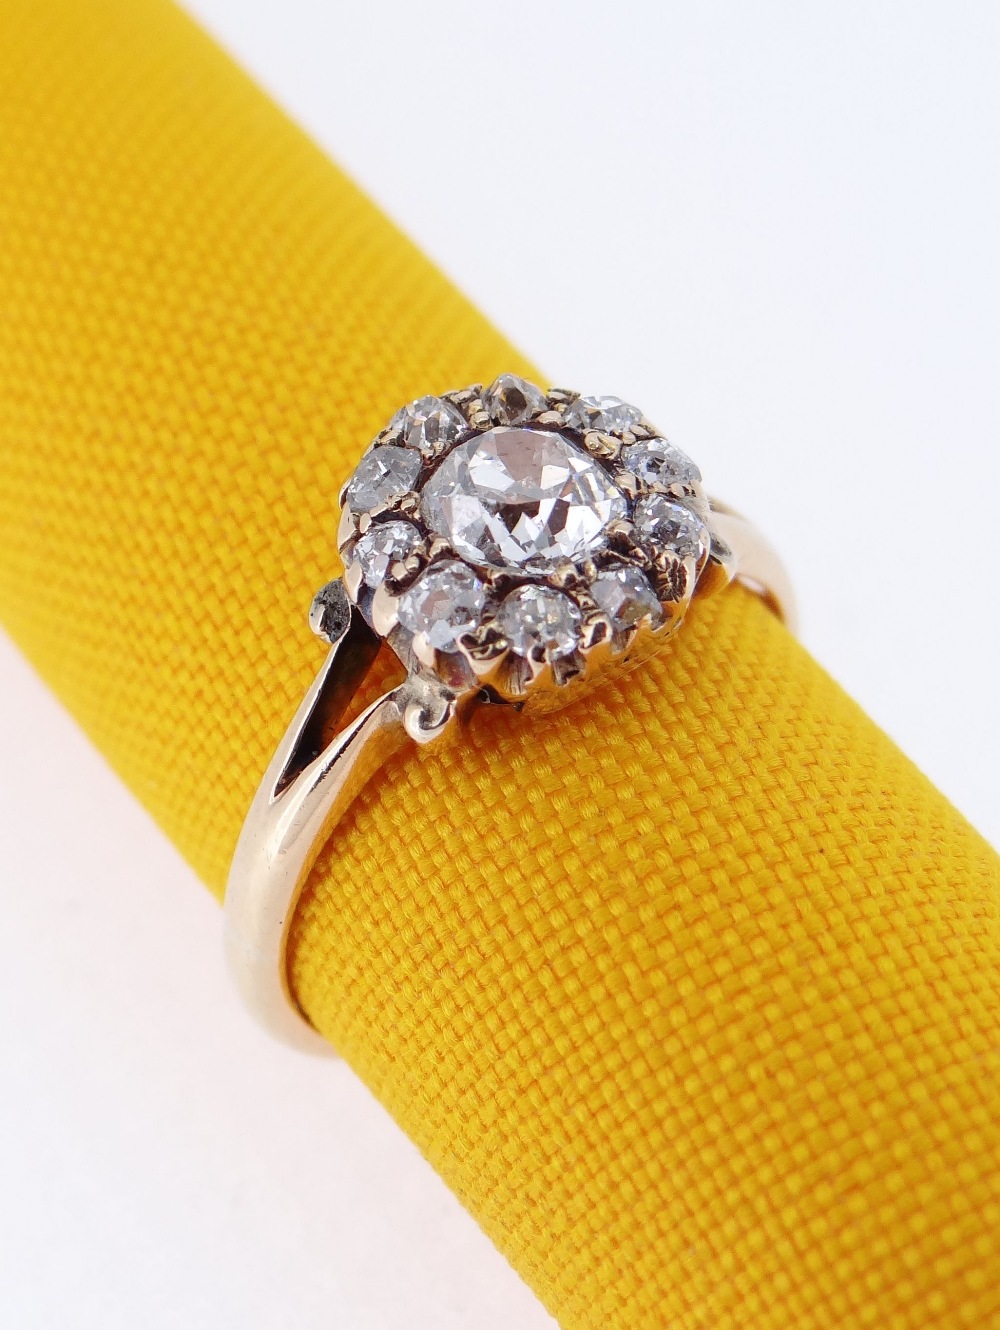 YELLOW METAL DIAMOND CLUSTER RING, the central stone 0.4cts approx. (visual estimate), surrounded by - Image 3 of 4